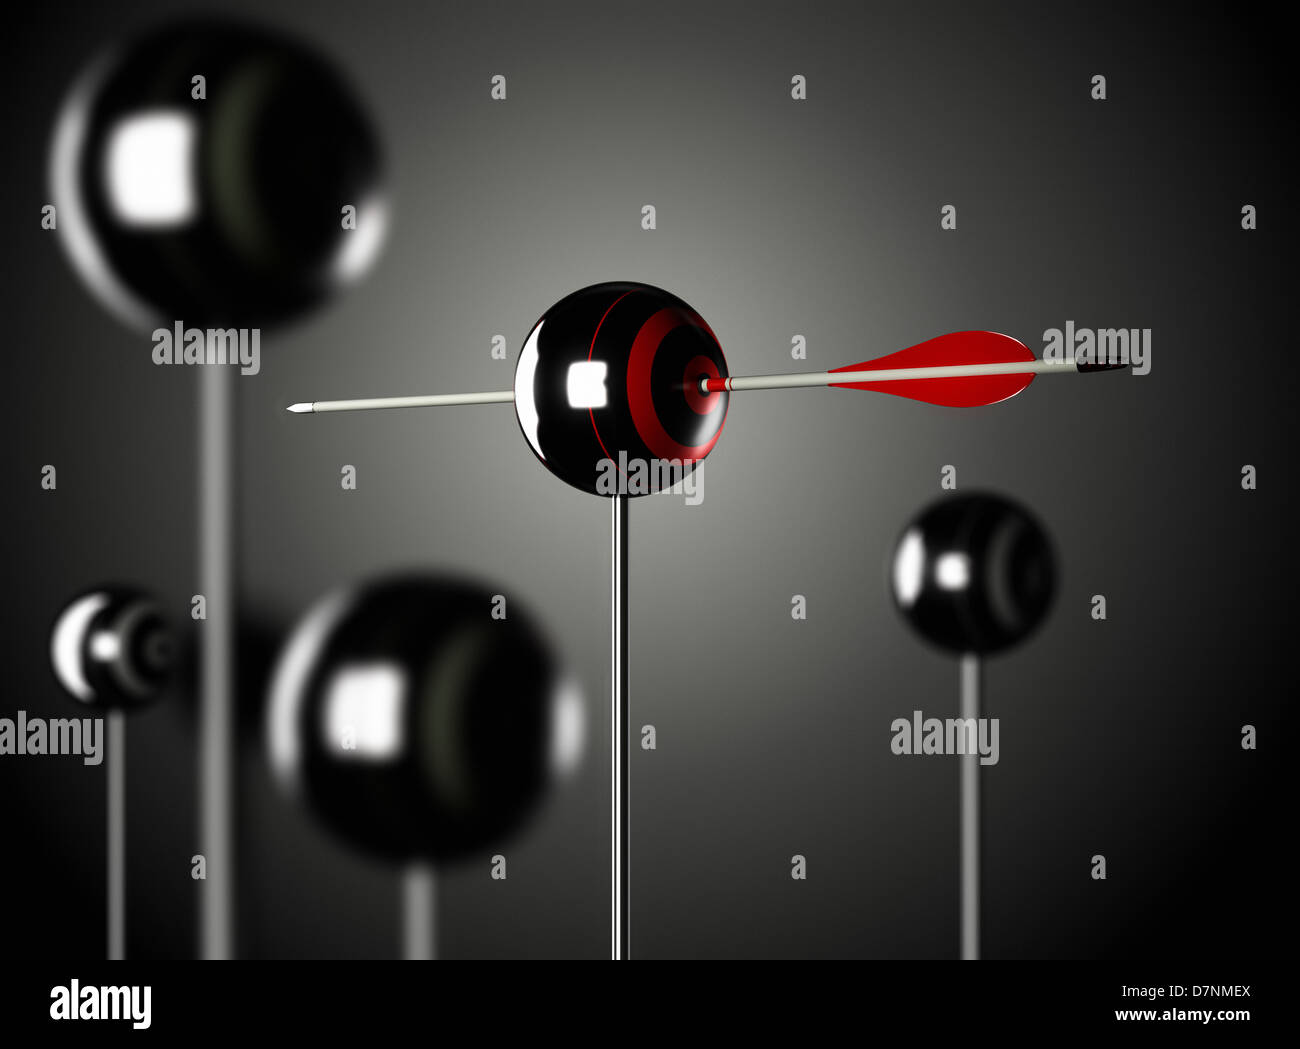 One red arrow piercing a ball shaped target mouted on a pole, black background, Blur effect3D render illustration Stock Photo